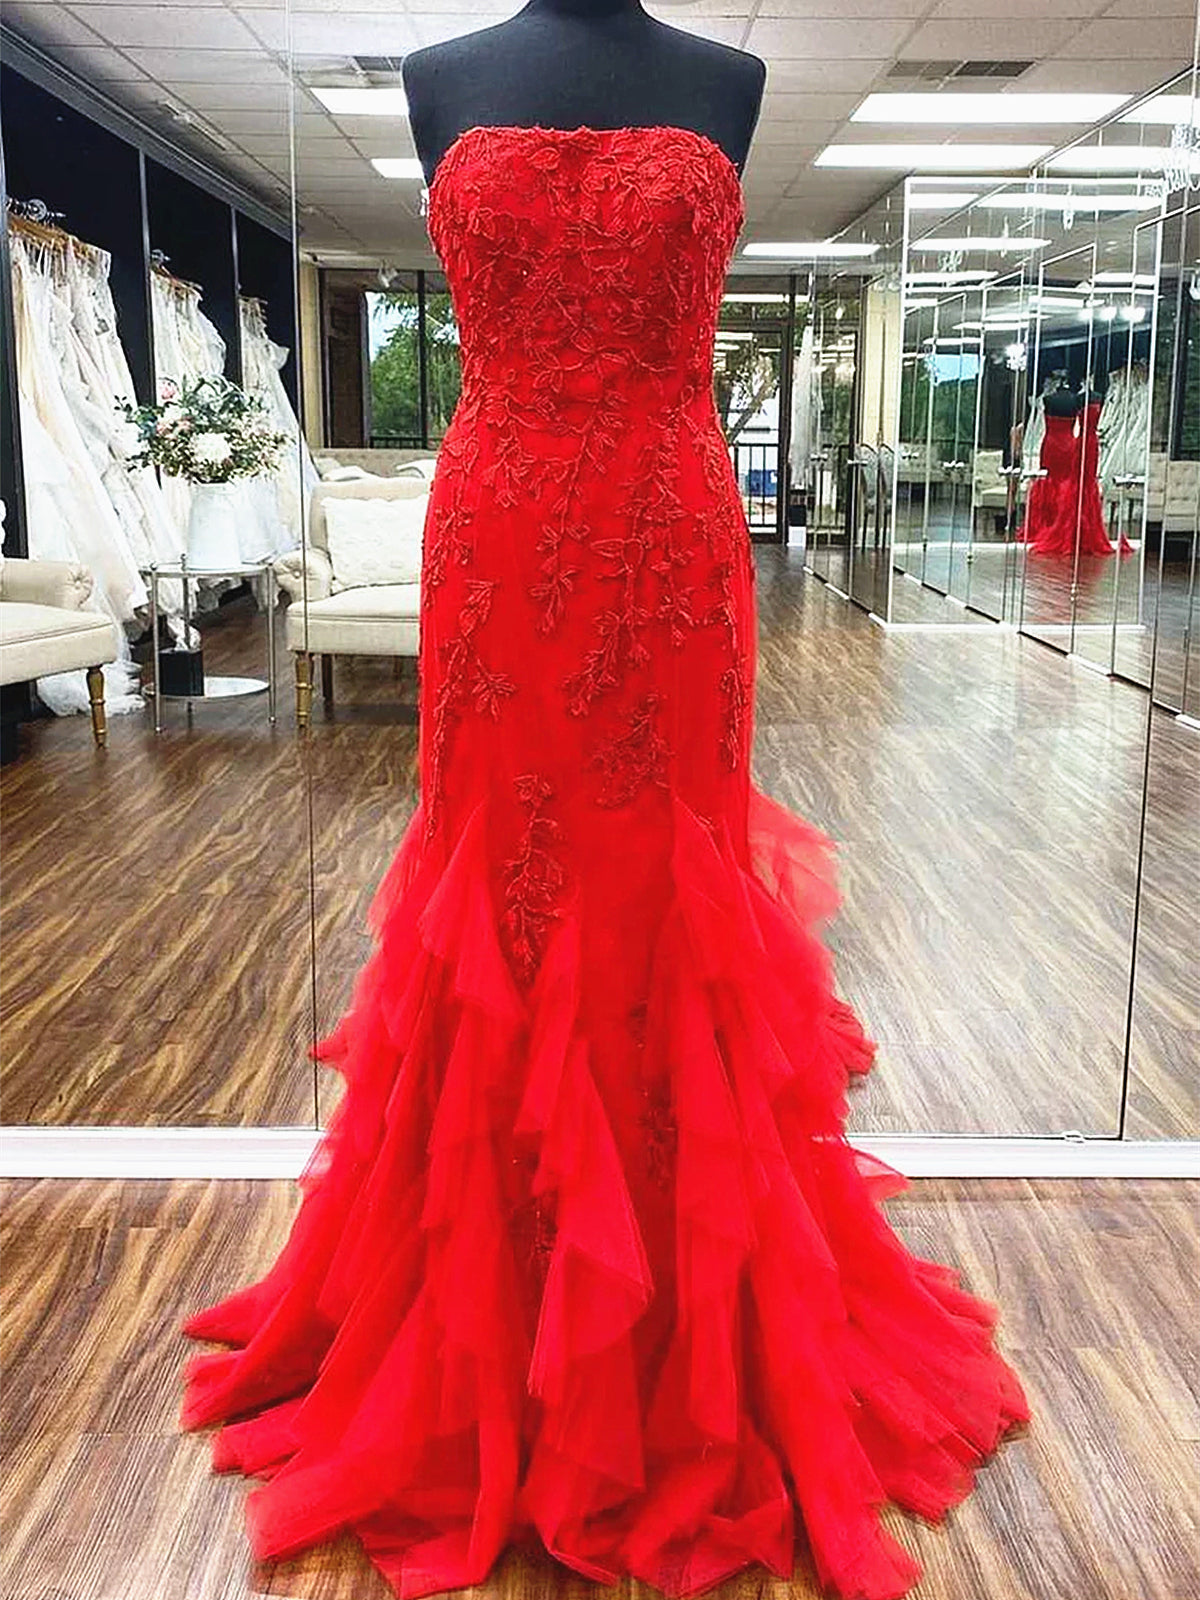 Red Tulle Ruffle Lace Mermaid Prom Dresses For Black girls For Women, Red Lace Ruffle Mermaid Long Formal Evening Dresses